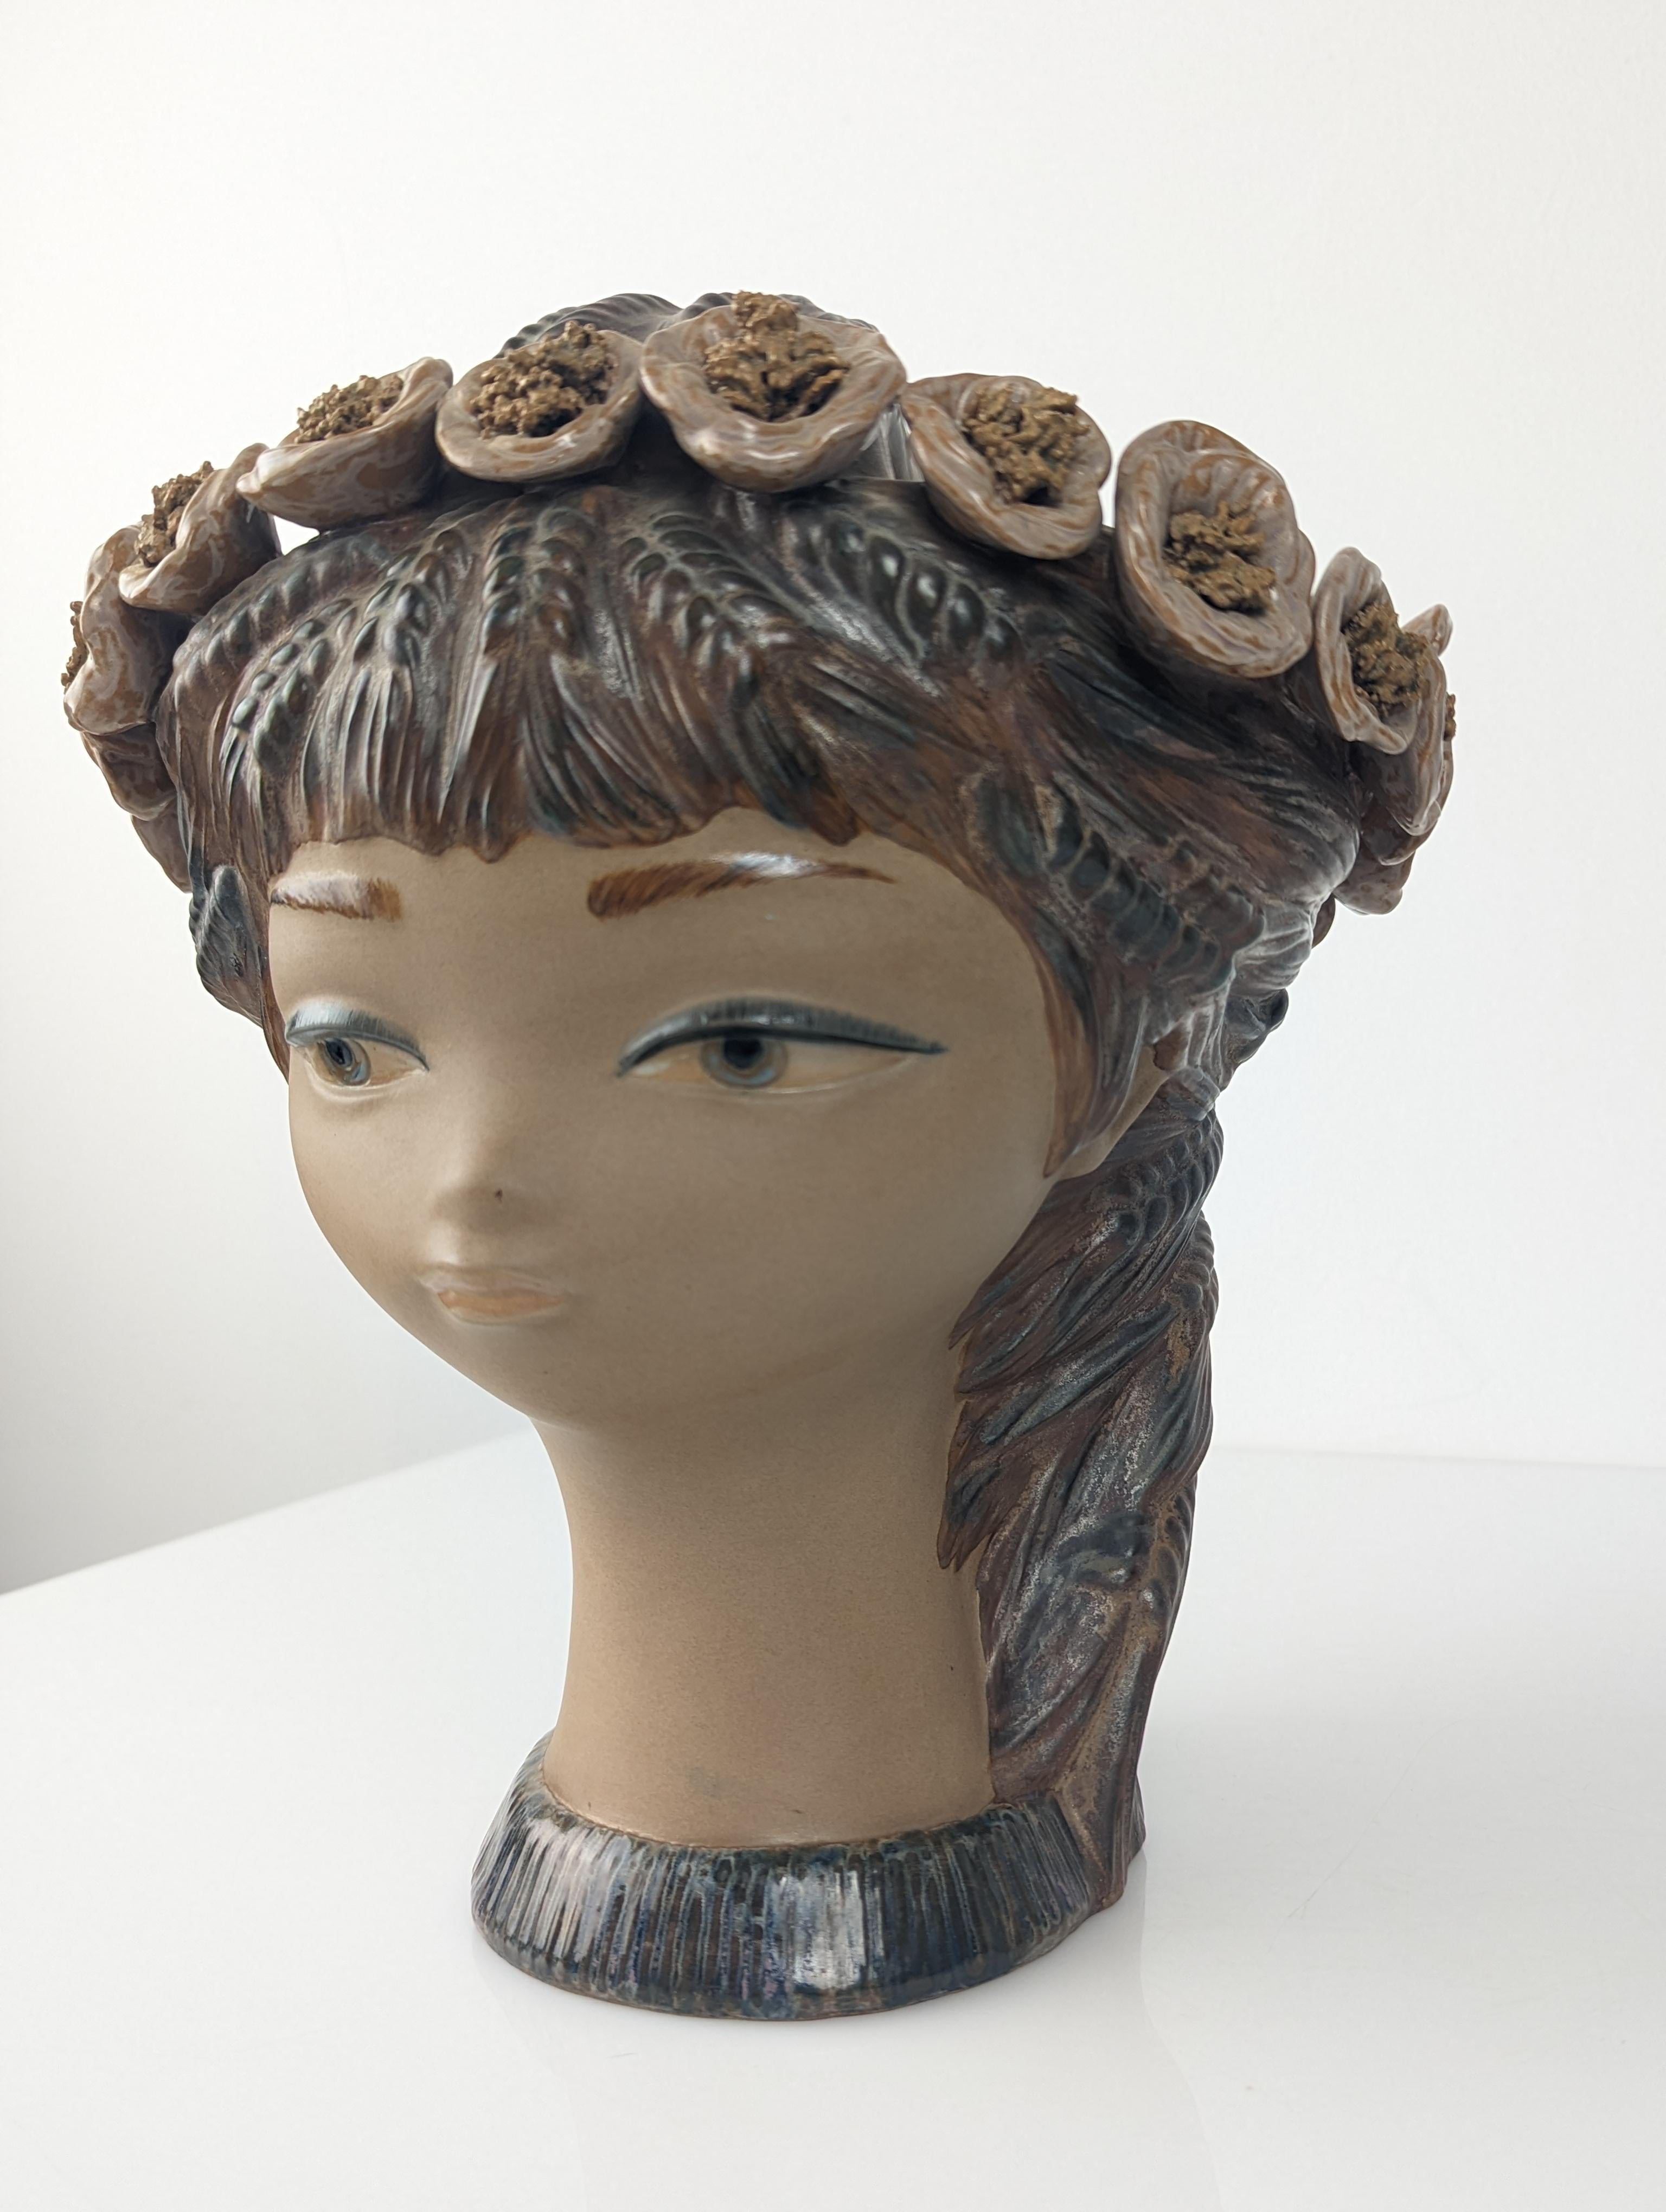 Precious vase with handle, design created by Vicente Martínez for Lladro in its rarest version, made in stoneware in 1971. This beautiful collection piece represents a beautiful young woman with a calm gaze, hair with spikes and a crown of poppies